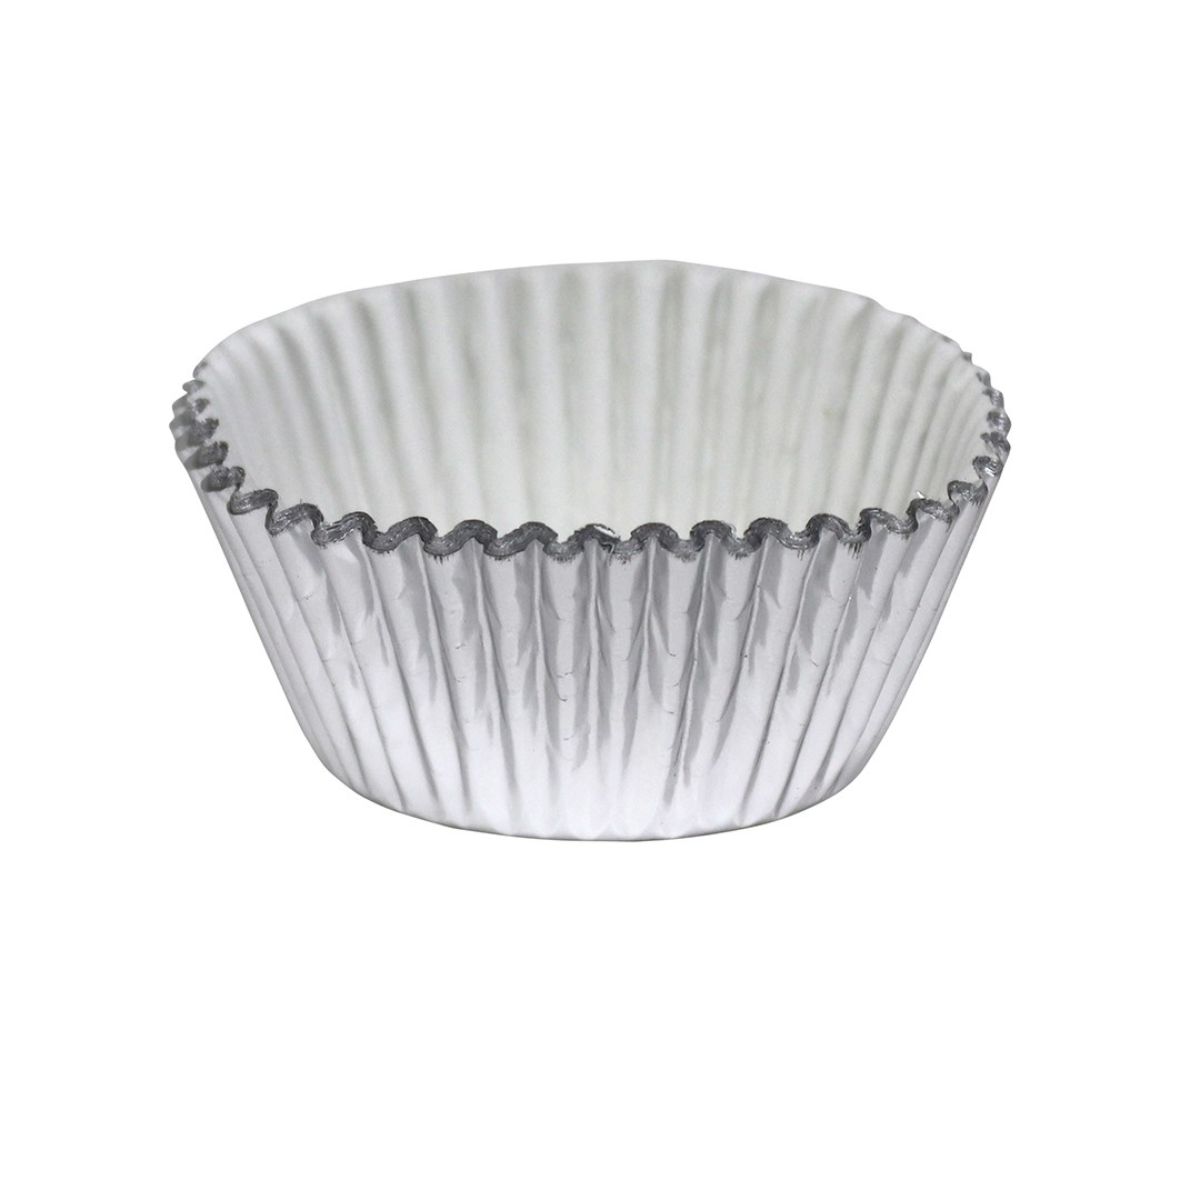 STANDARD Foil Cupcake Liners / Baking Cups – 500 ct sleeve